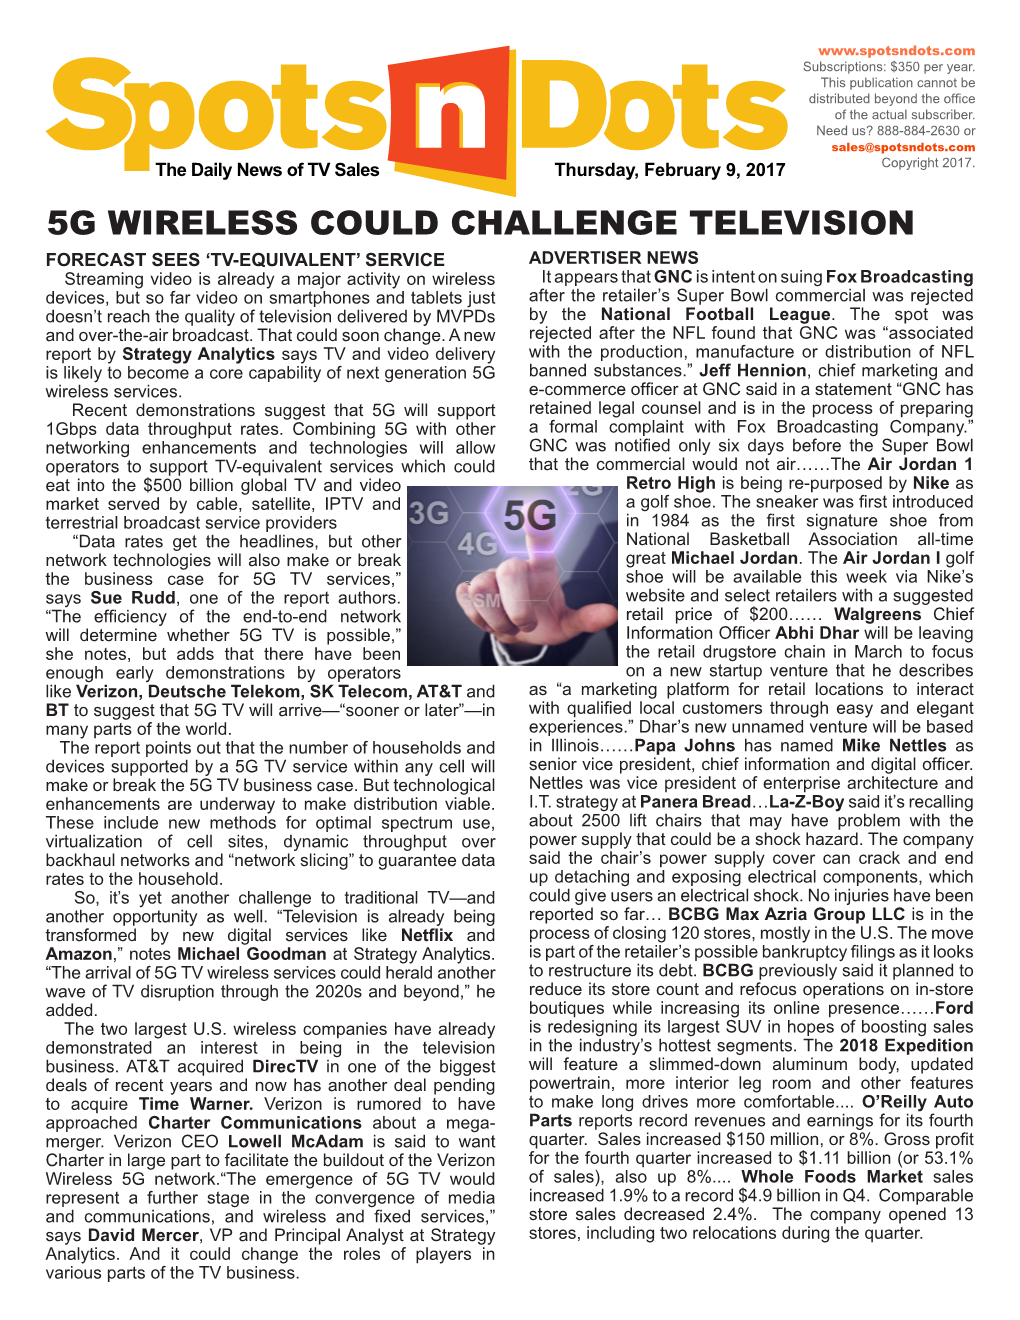 5G Wireless Could Challenge Television